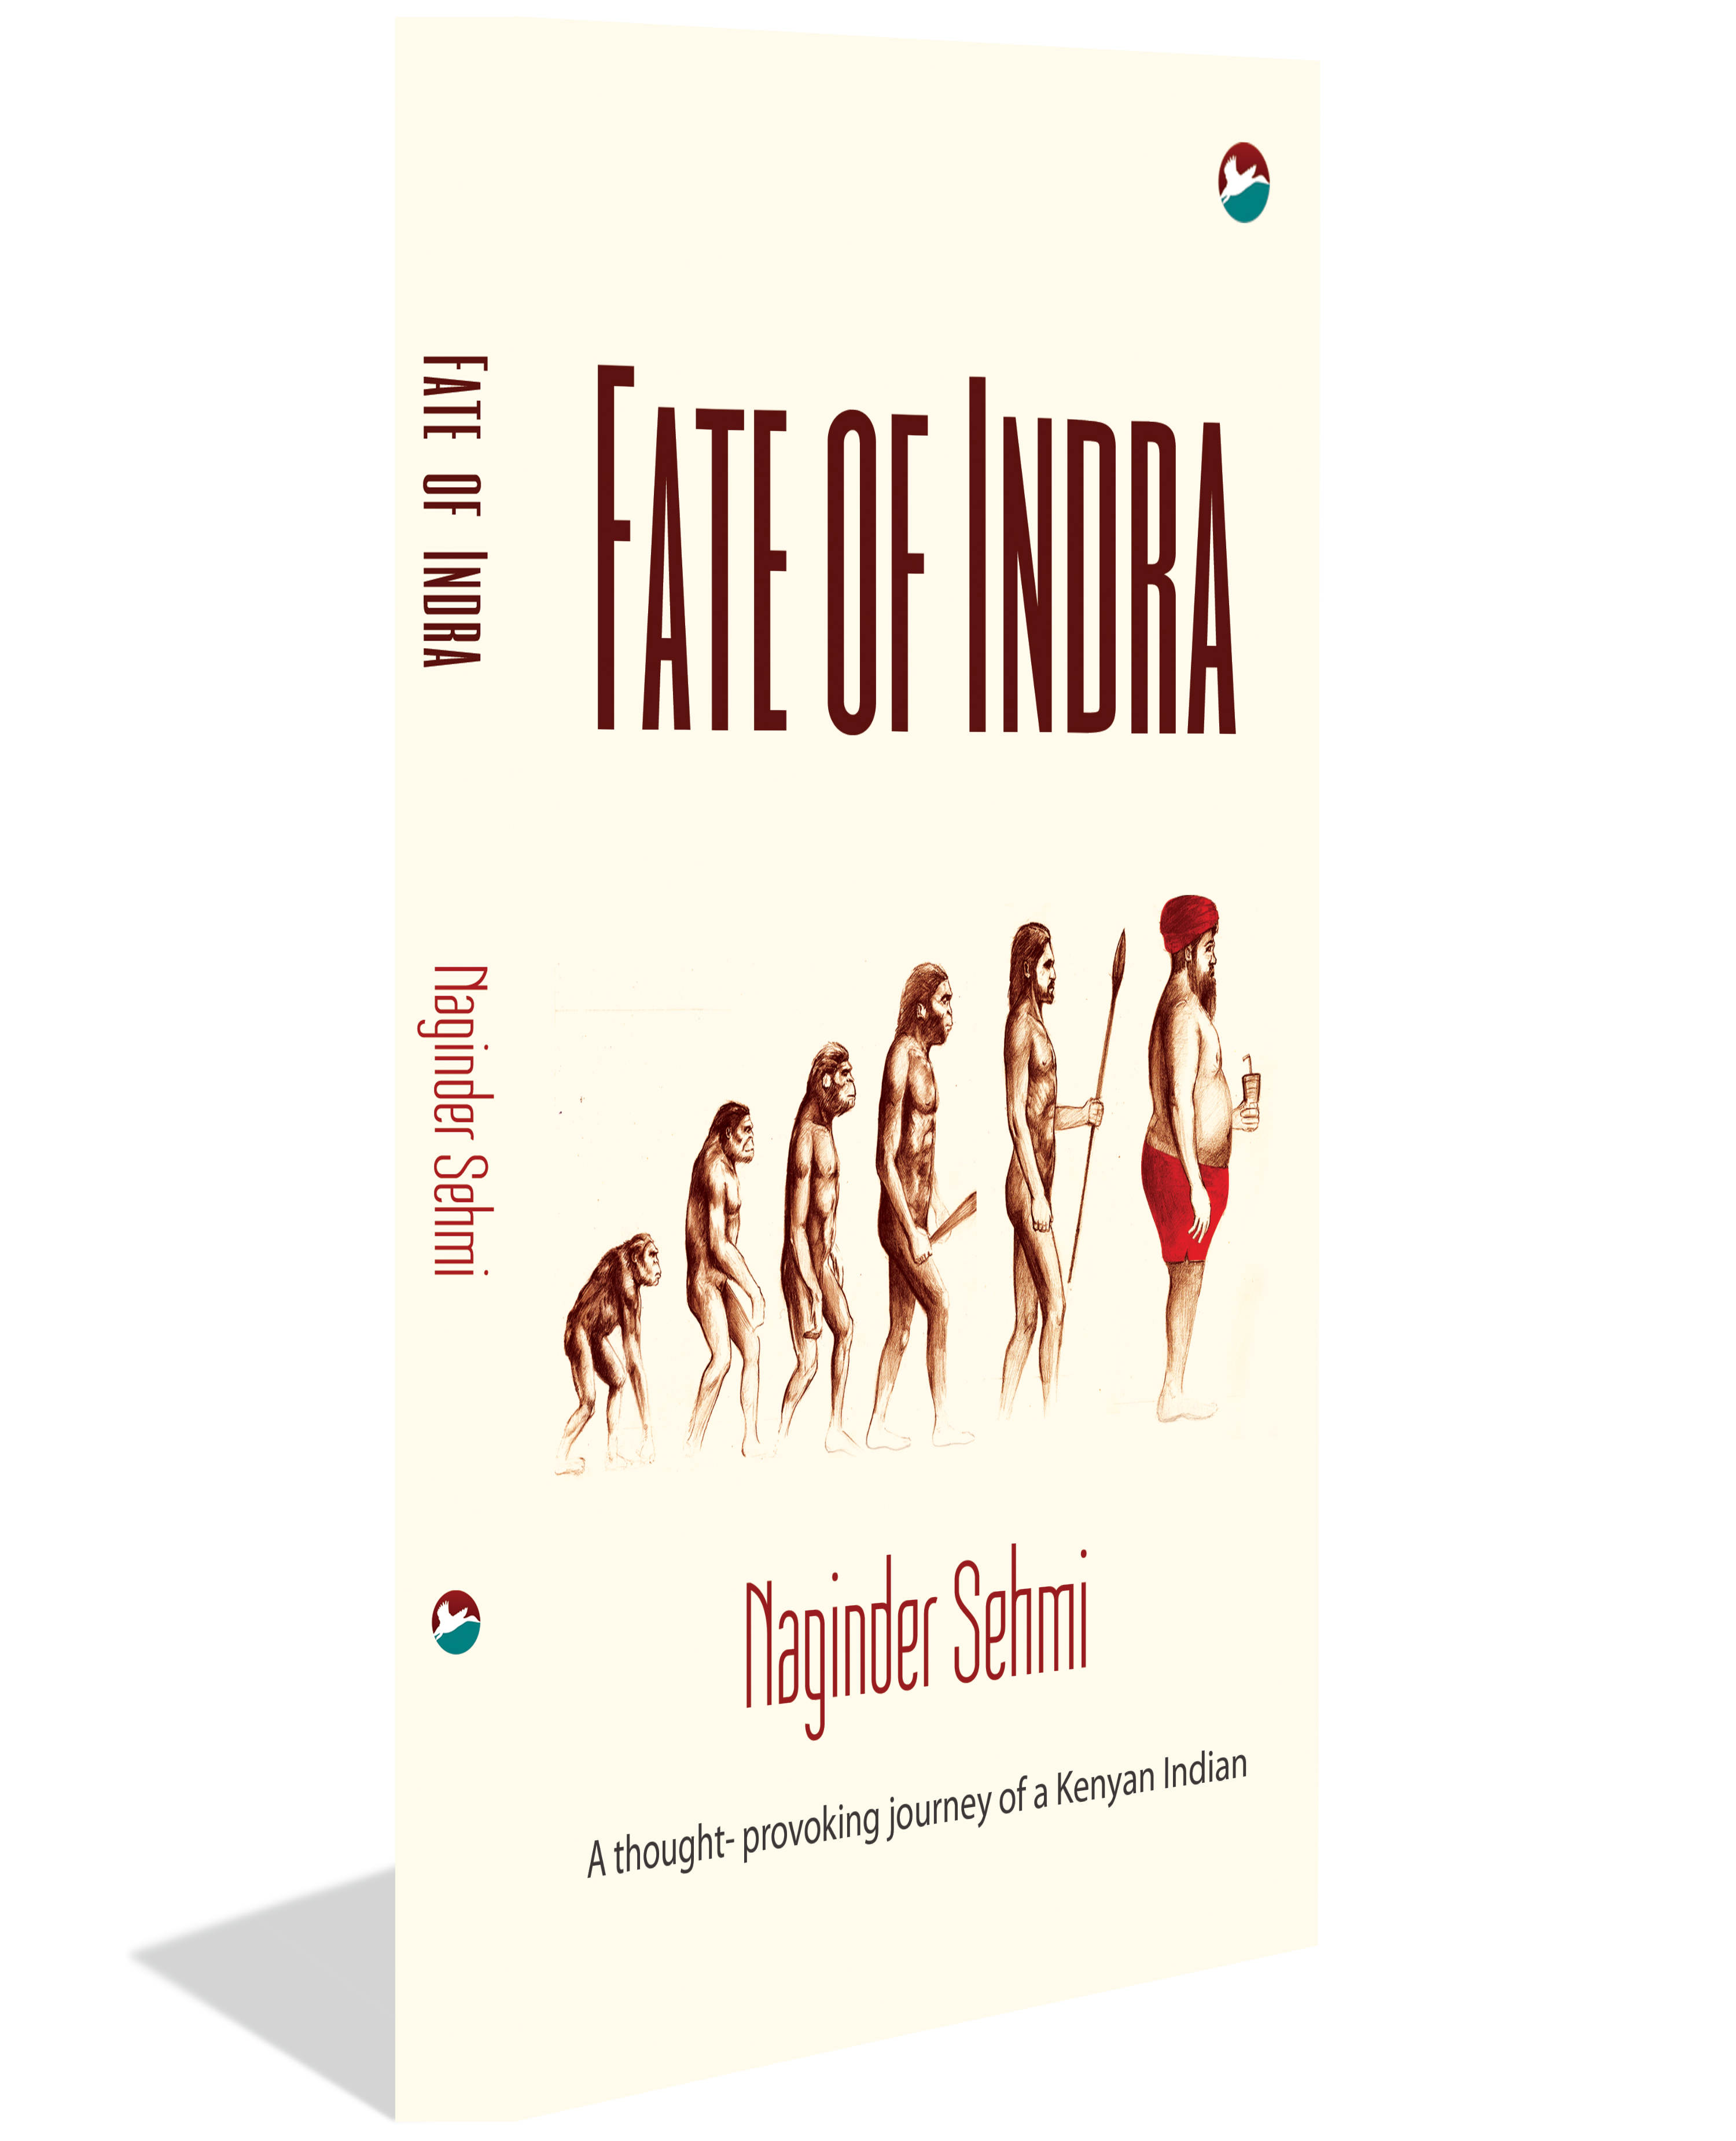 Fate of Indra – A thought- provoking journey of a Kenyan Indian